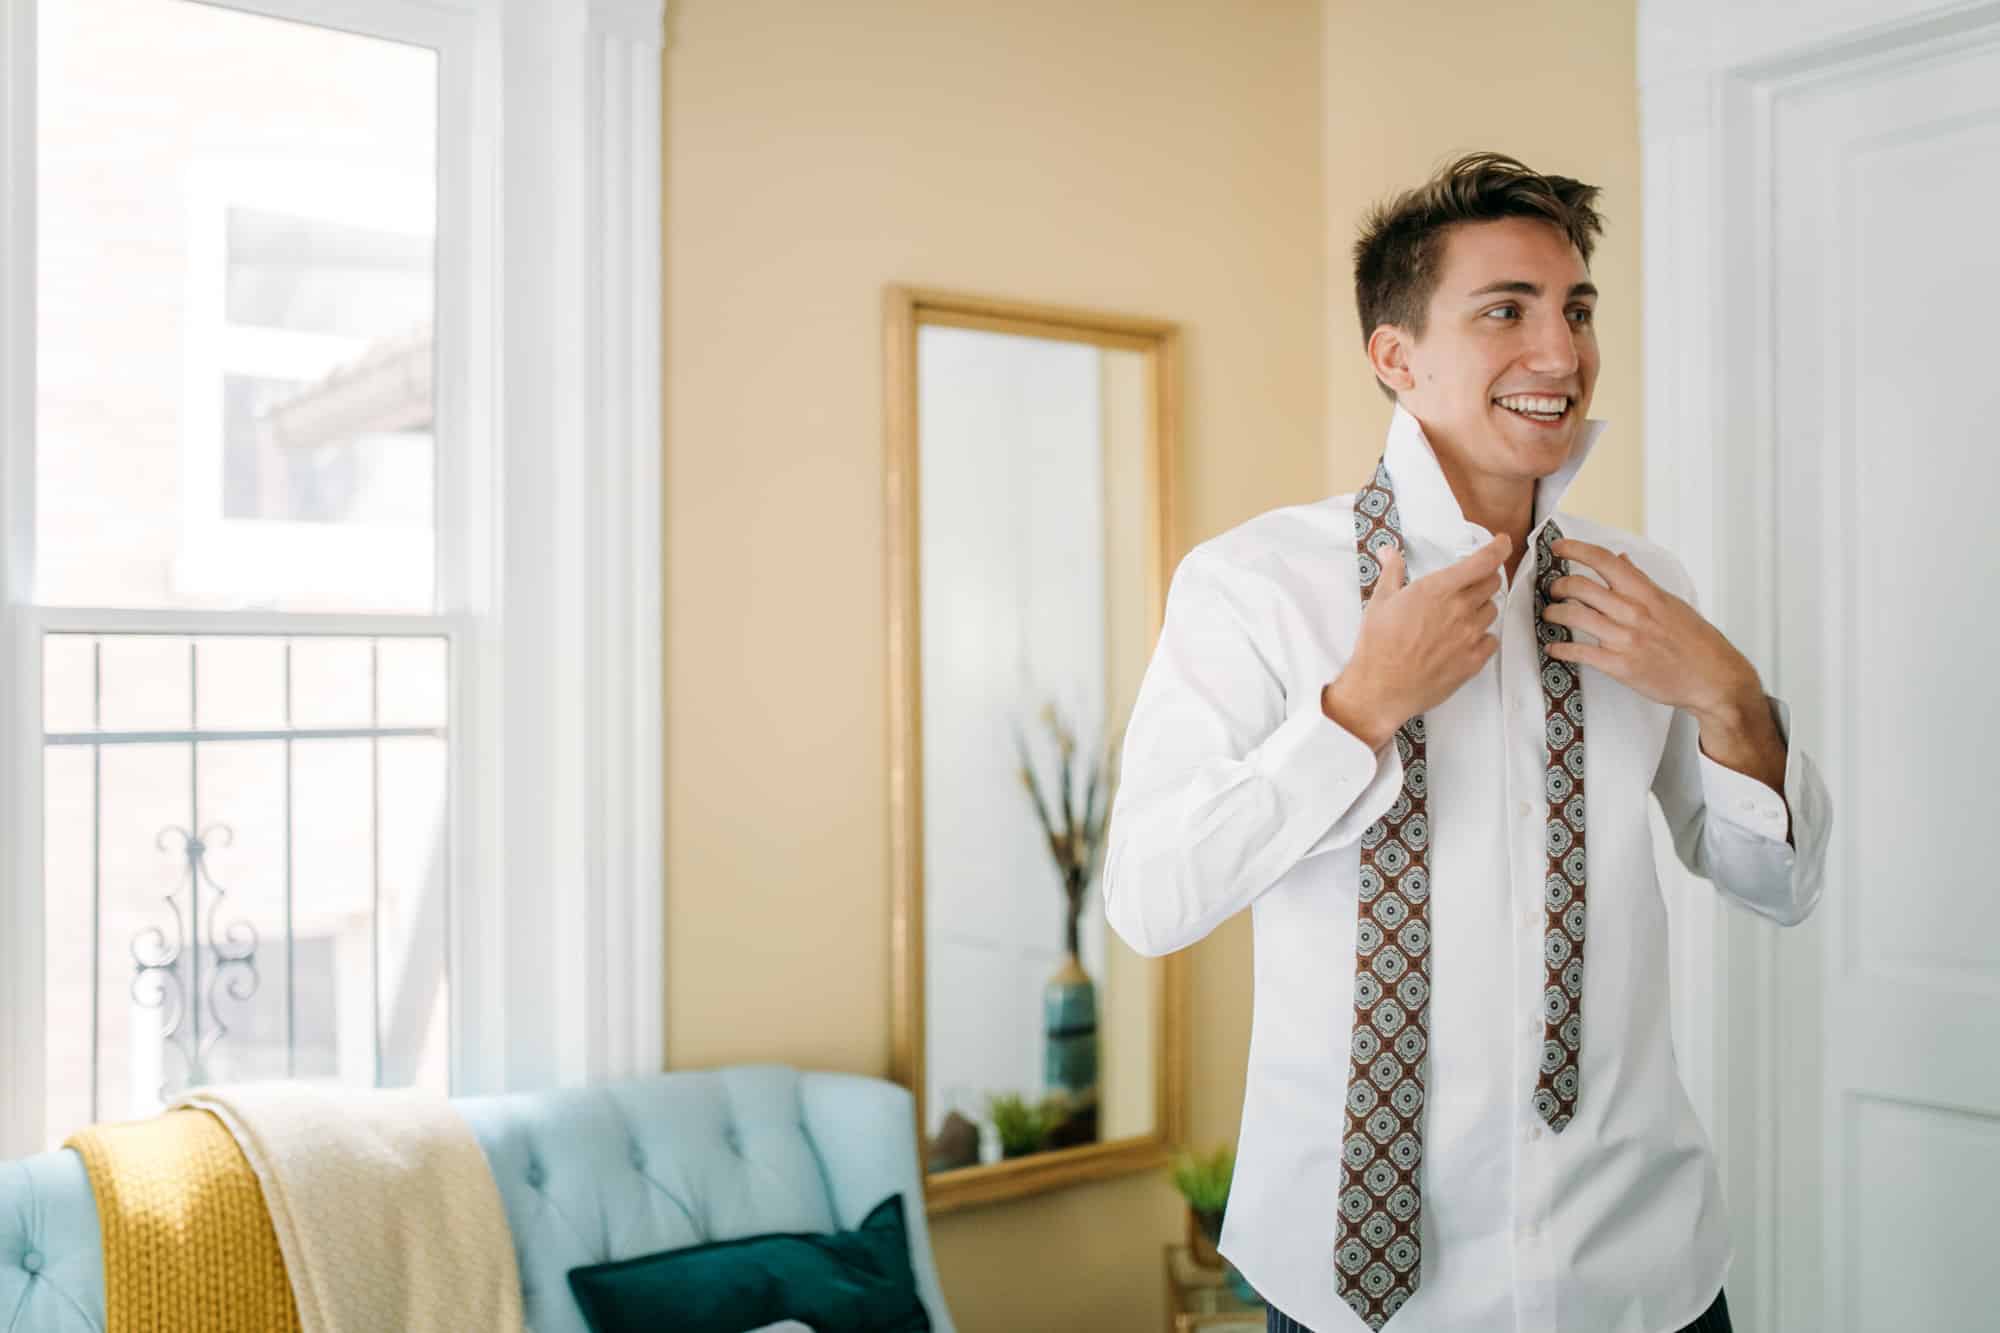 groom getting ready, getting ready at airbnb, groom tie ideas, groom tie, colorado wedding, colorado wedding venue, colorado wedding photographer